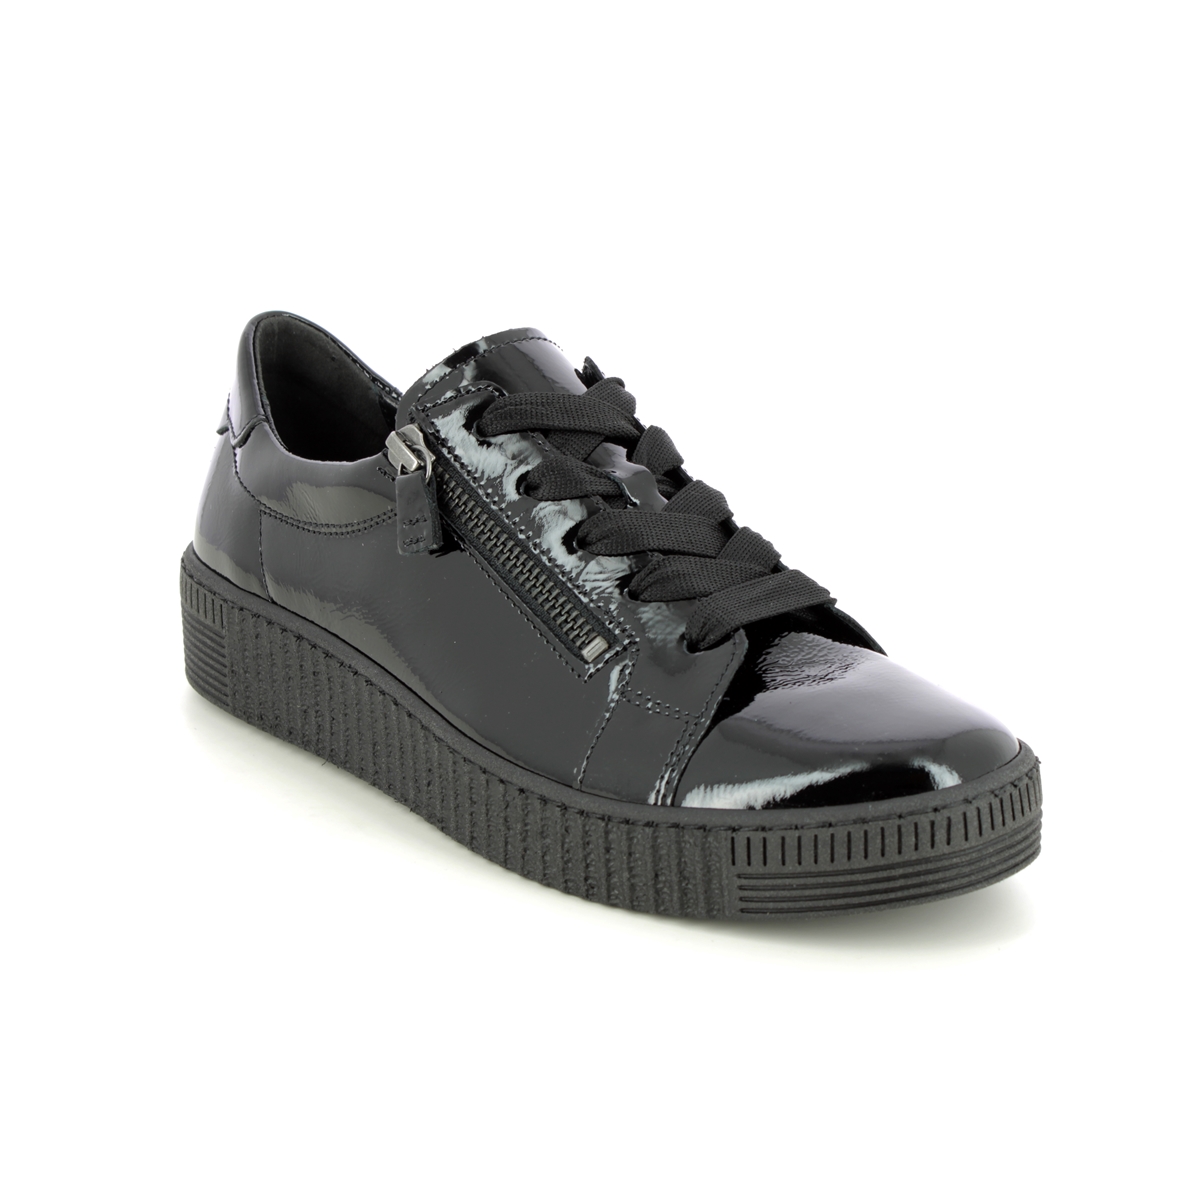 Gabor Wisdom Black Patent Womens Trainers 93.334.97 In Size 5 In Plain Black Patent  Womens Trainers In Soft Black Patent Leather